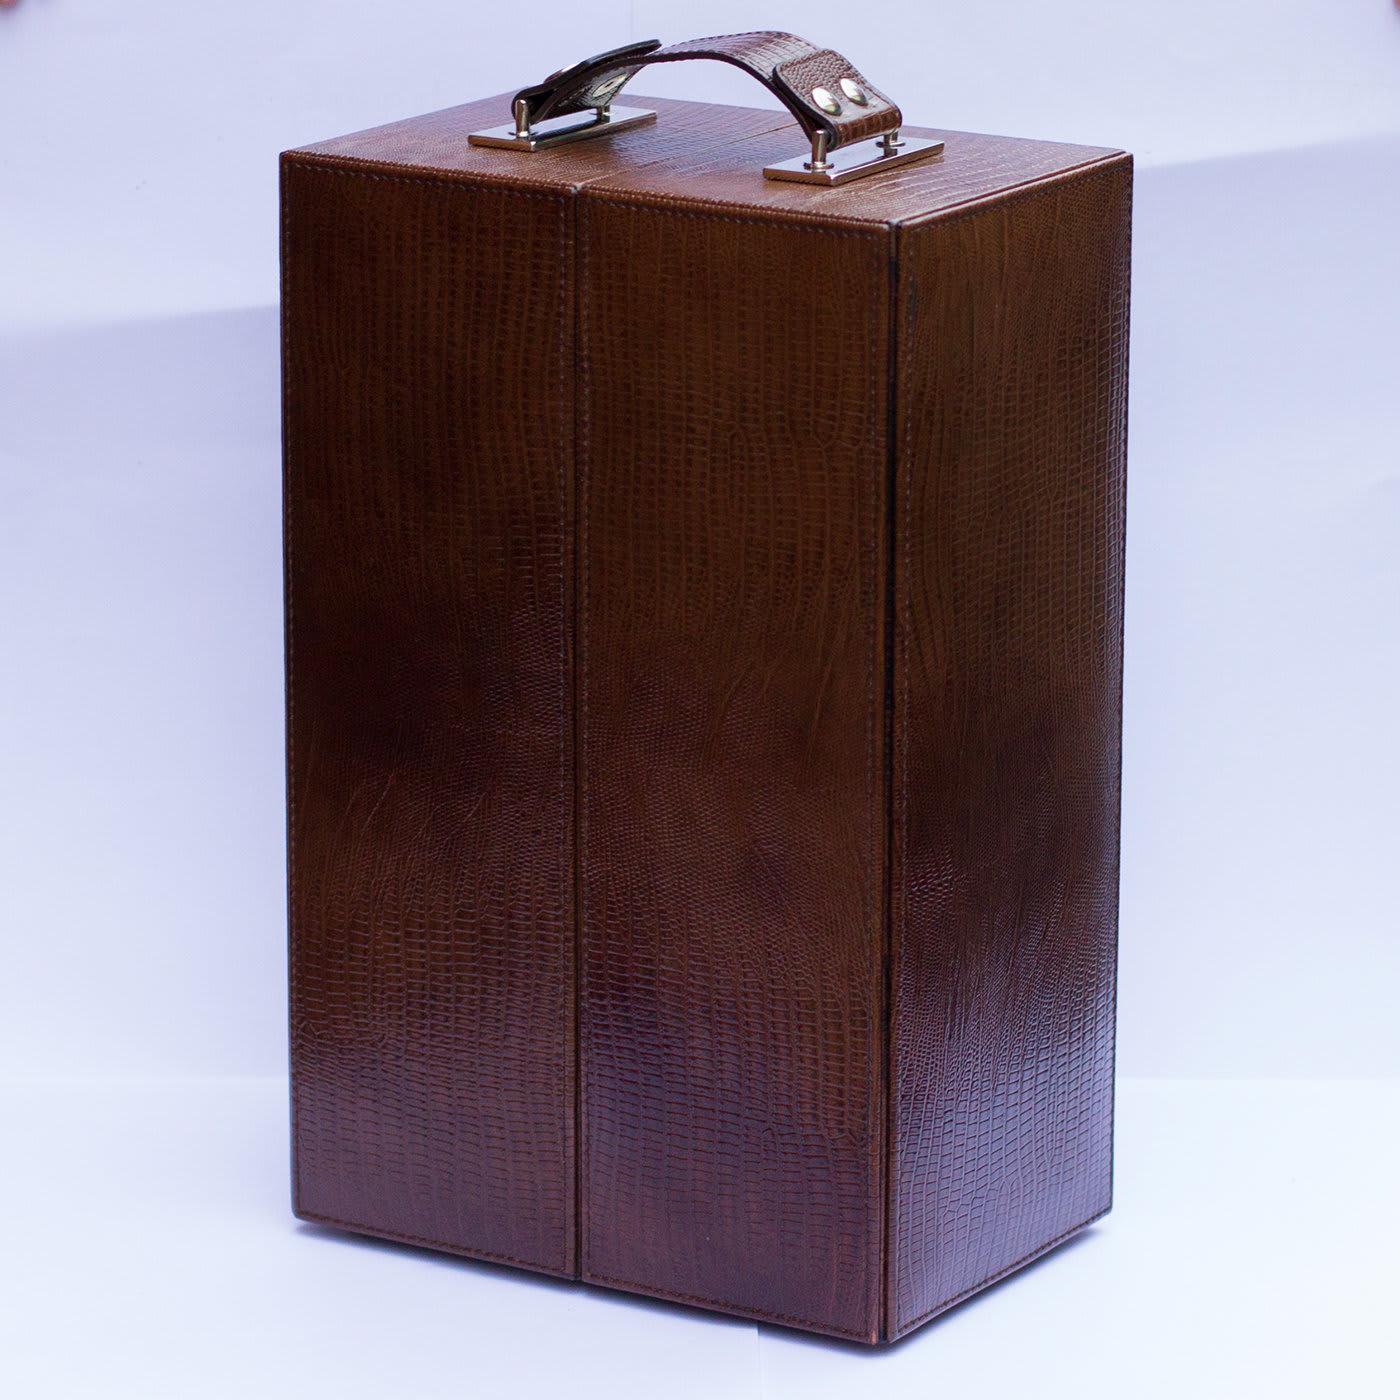 This sophisticated case is elegantly handcrafted of brown leather and features two rectangular metal handles on top. It opens in half with a hinged closure to reveal two storage compartments lined in soft cream-colored suede fitted to contain three